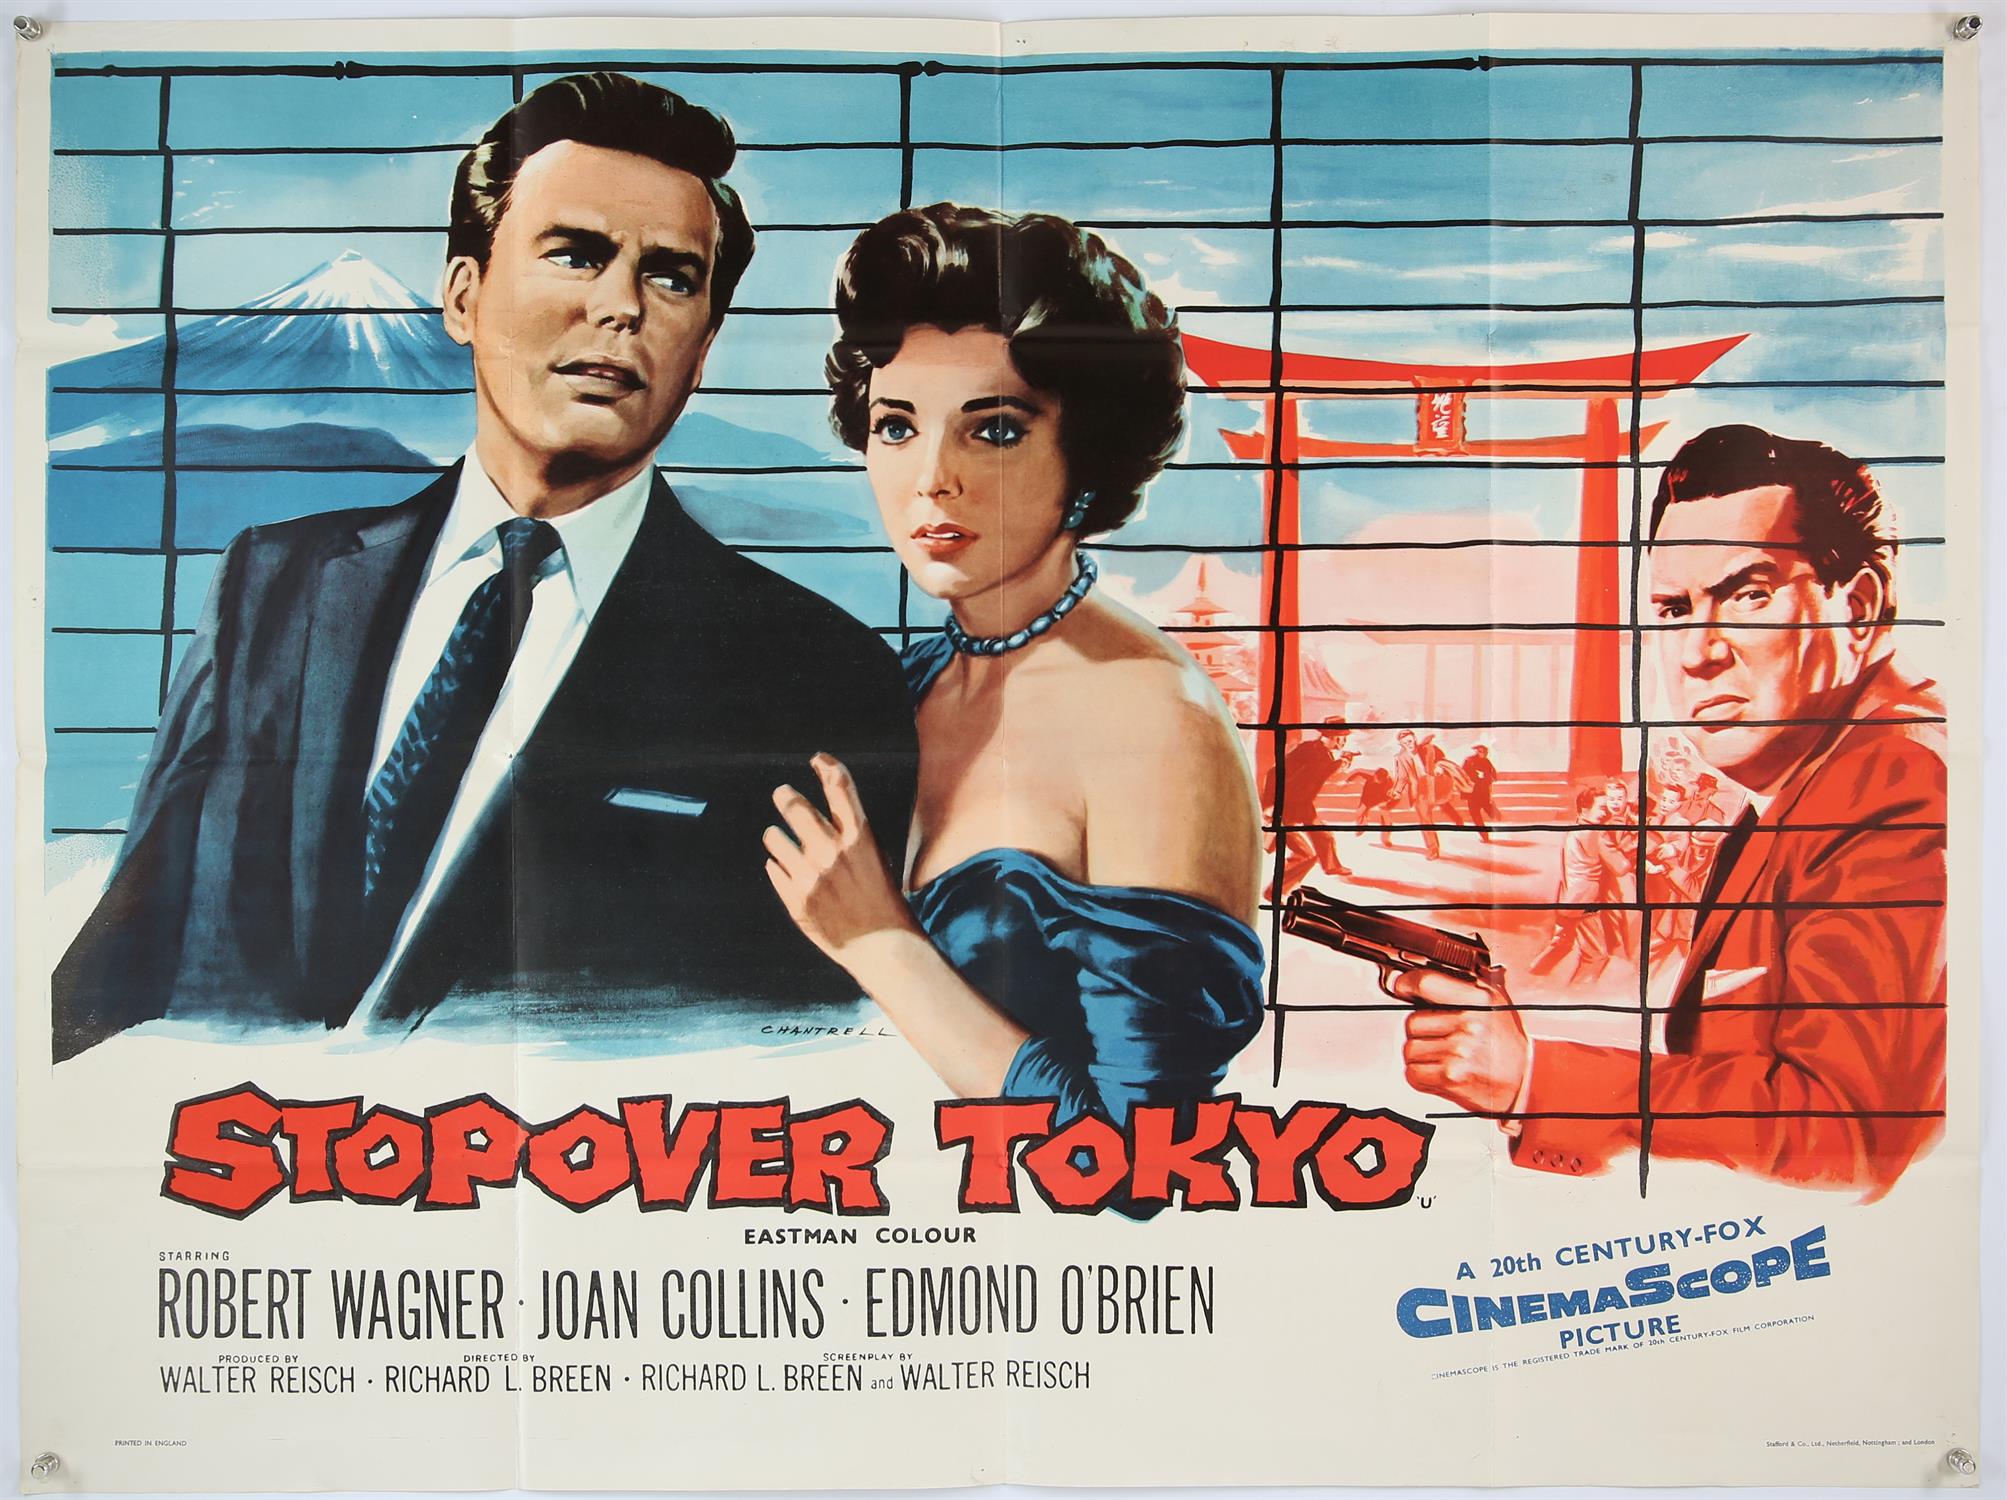 Stopover Tokyo (1957) British Quad film poster, starring Robert Wagner, artwork by Tom Cantrell,